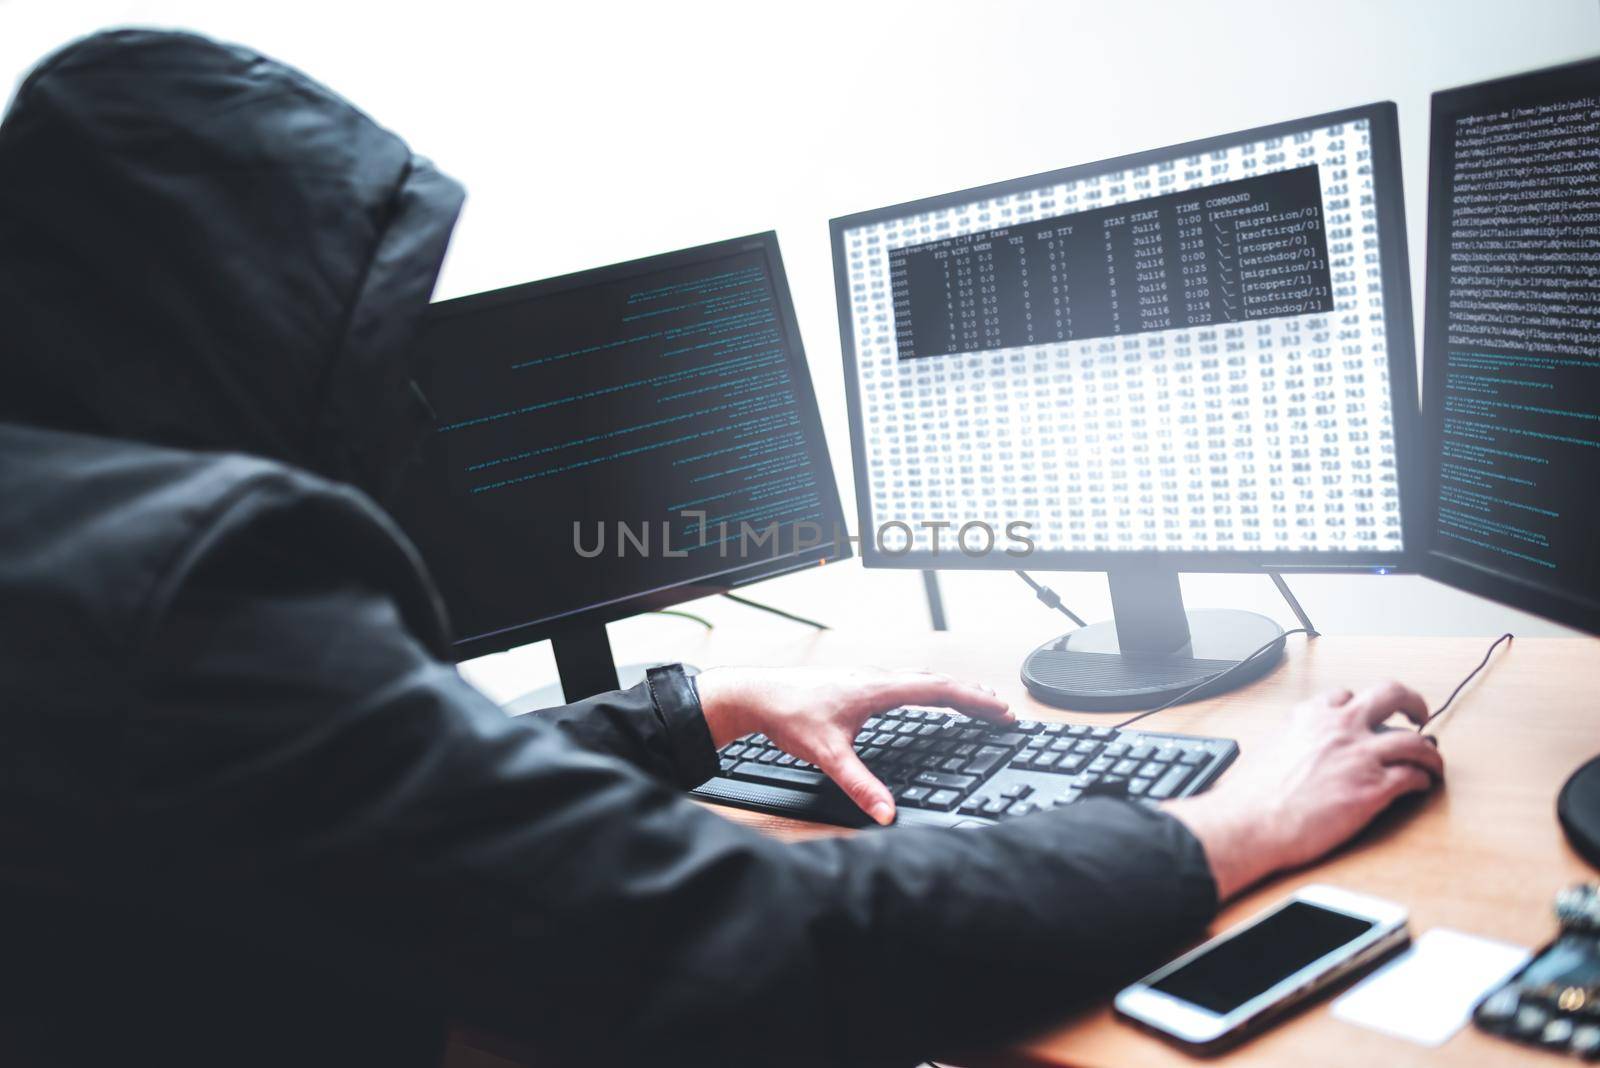 Picture of male hacker trying to steal information from system while looking at computer, isolated on white background by Nickstock